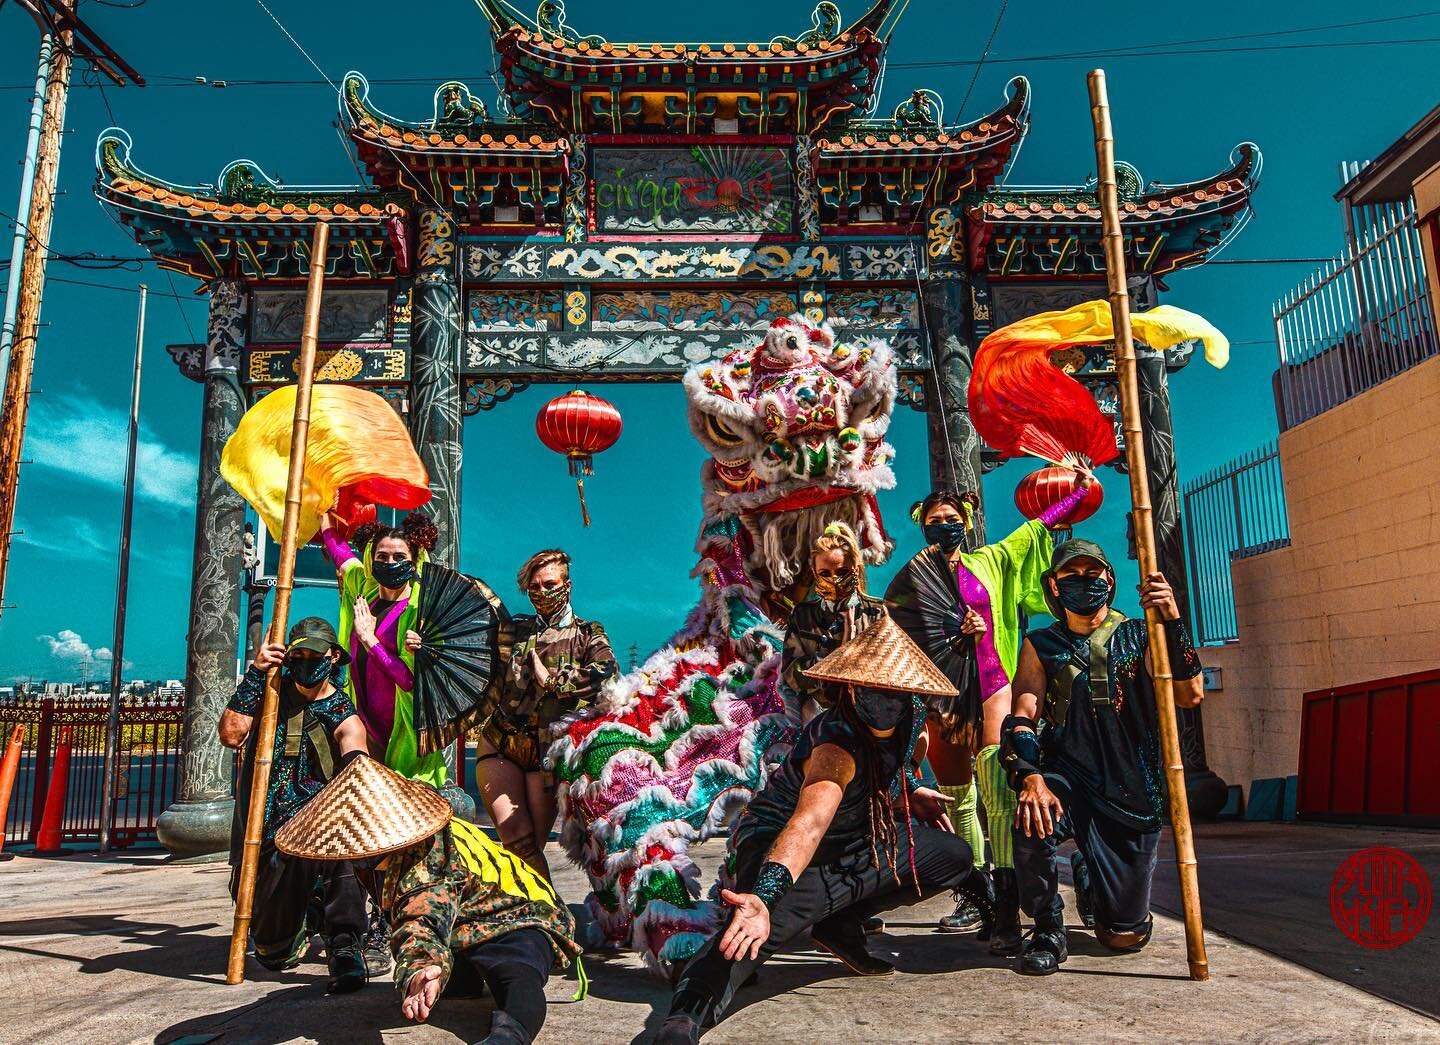 🎆This is How you want to roll up to the NewYears Eve Celebrations🎆
.
. **DOUBLE TAP** if youre ready to kick start your #NYE with your #SQUADGOALS 📸: @syhphotography @scotty.hsieh
🎎wardrobe : @seadragonstudio #SDglamfam .
.
.
.
#photography #phot